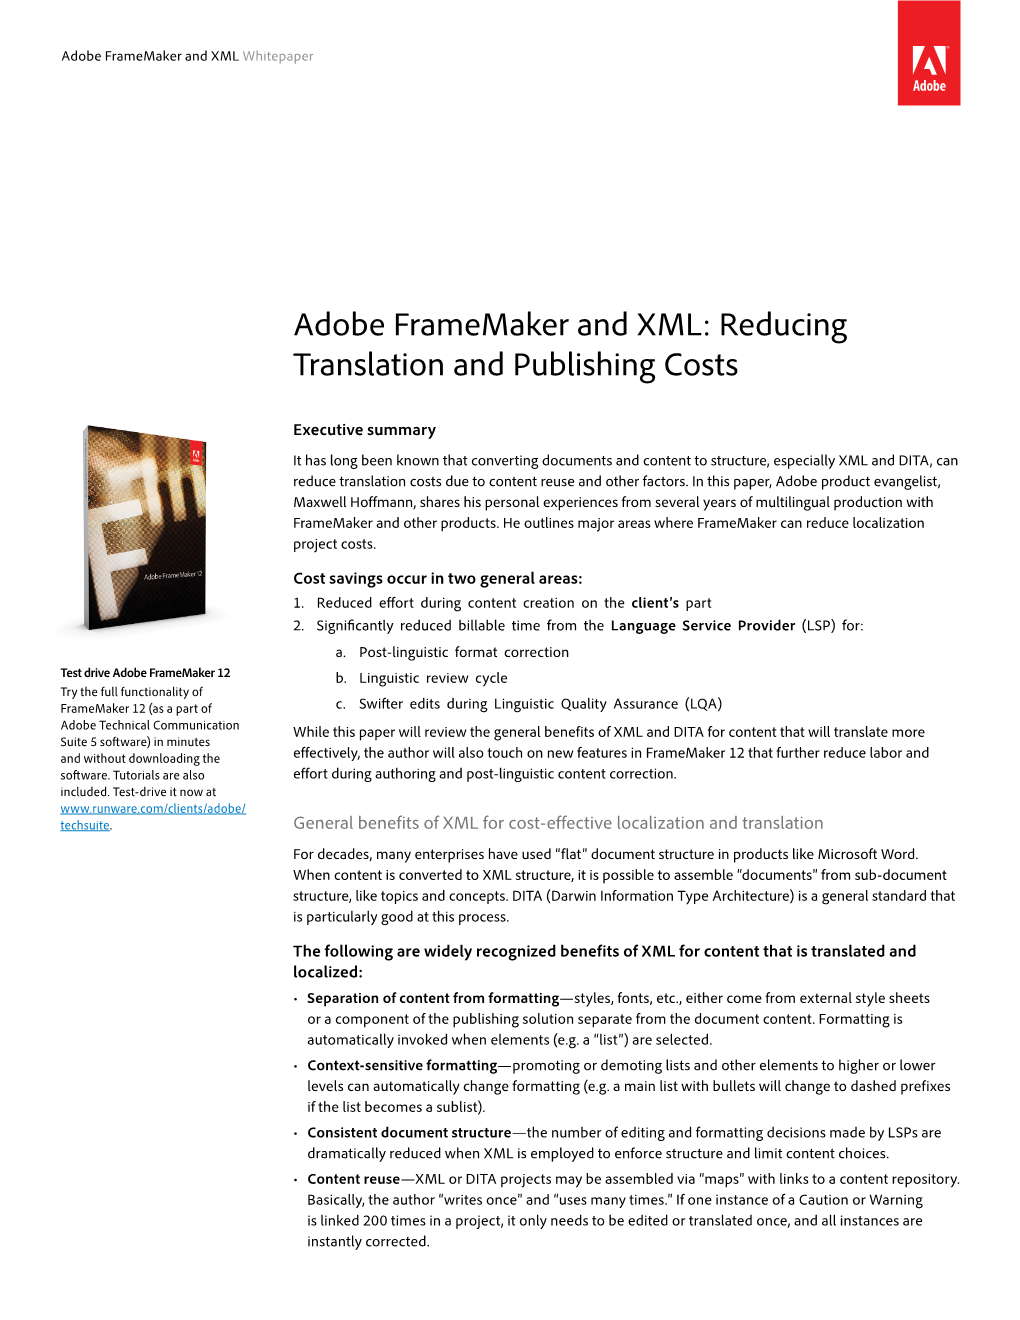 Adobe Framemaker and XML: Reducing Translation and Publishing Costs